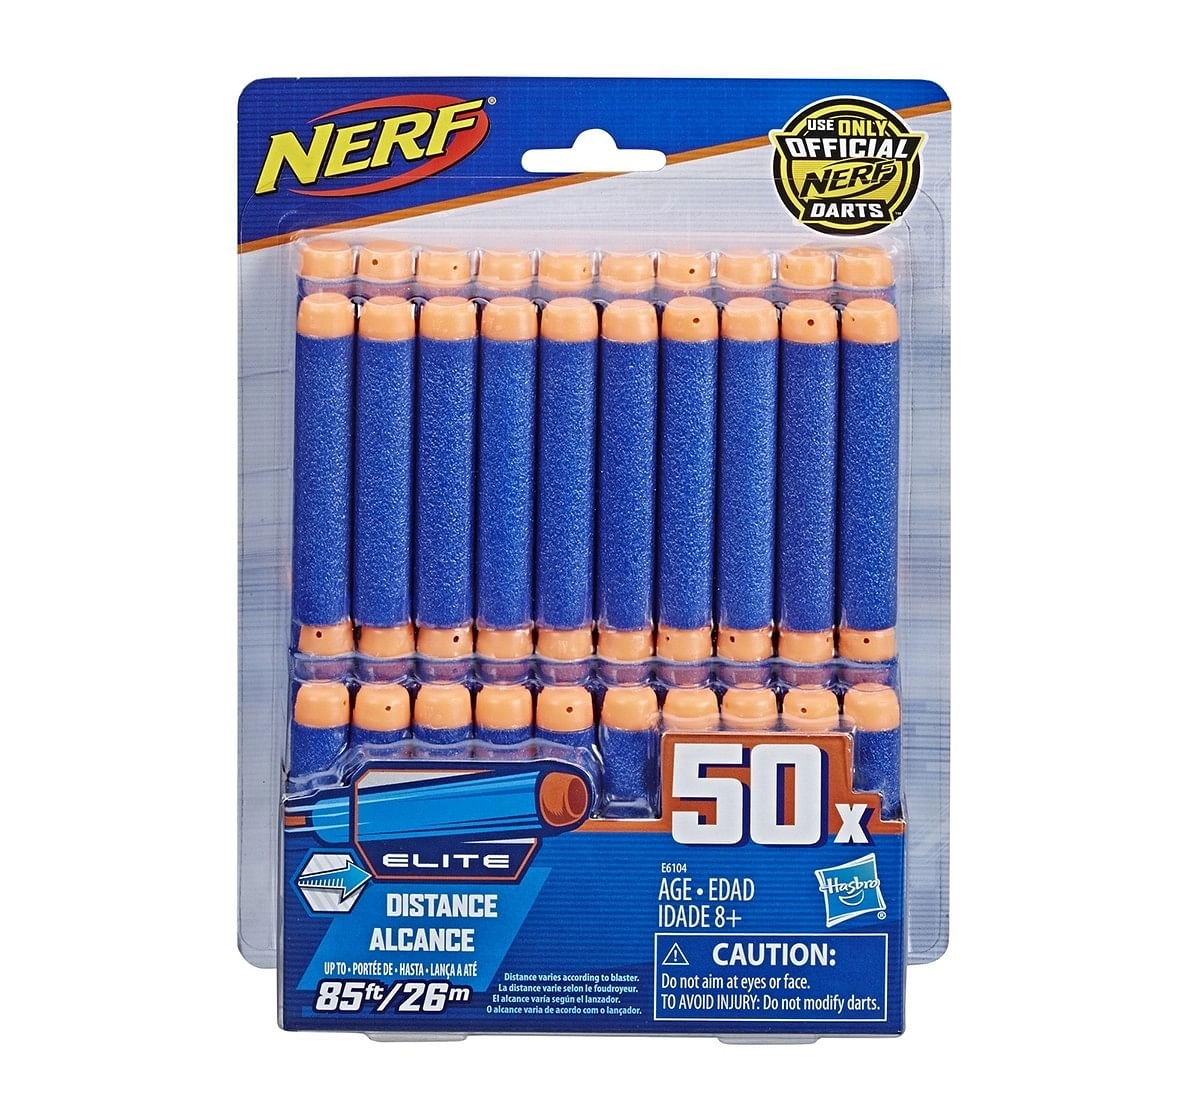 Nerf Official 50 Dart Elite Refill Pack for Nerf N-Strike Elite AccuStrike Zombie Strike Modulus Toy Blasters Target Games and Darts for age 8Y+ 